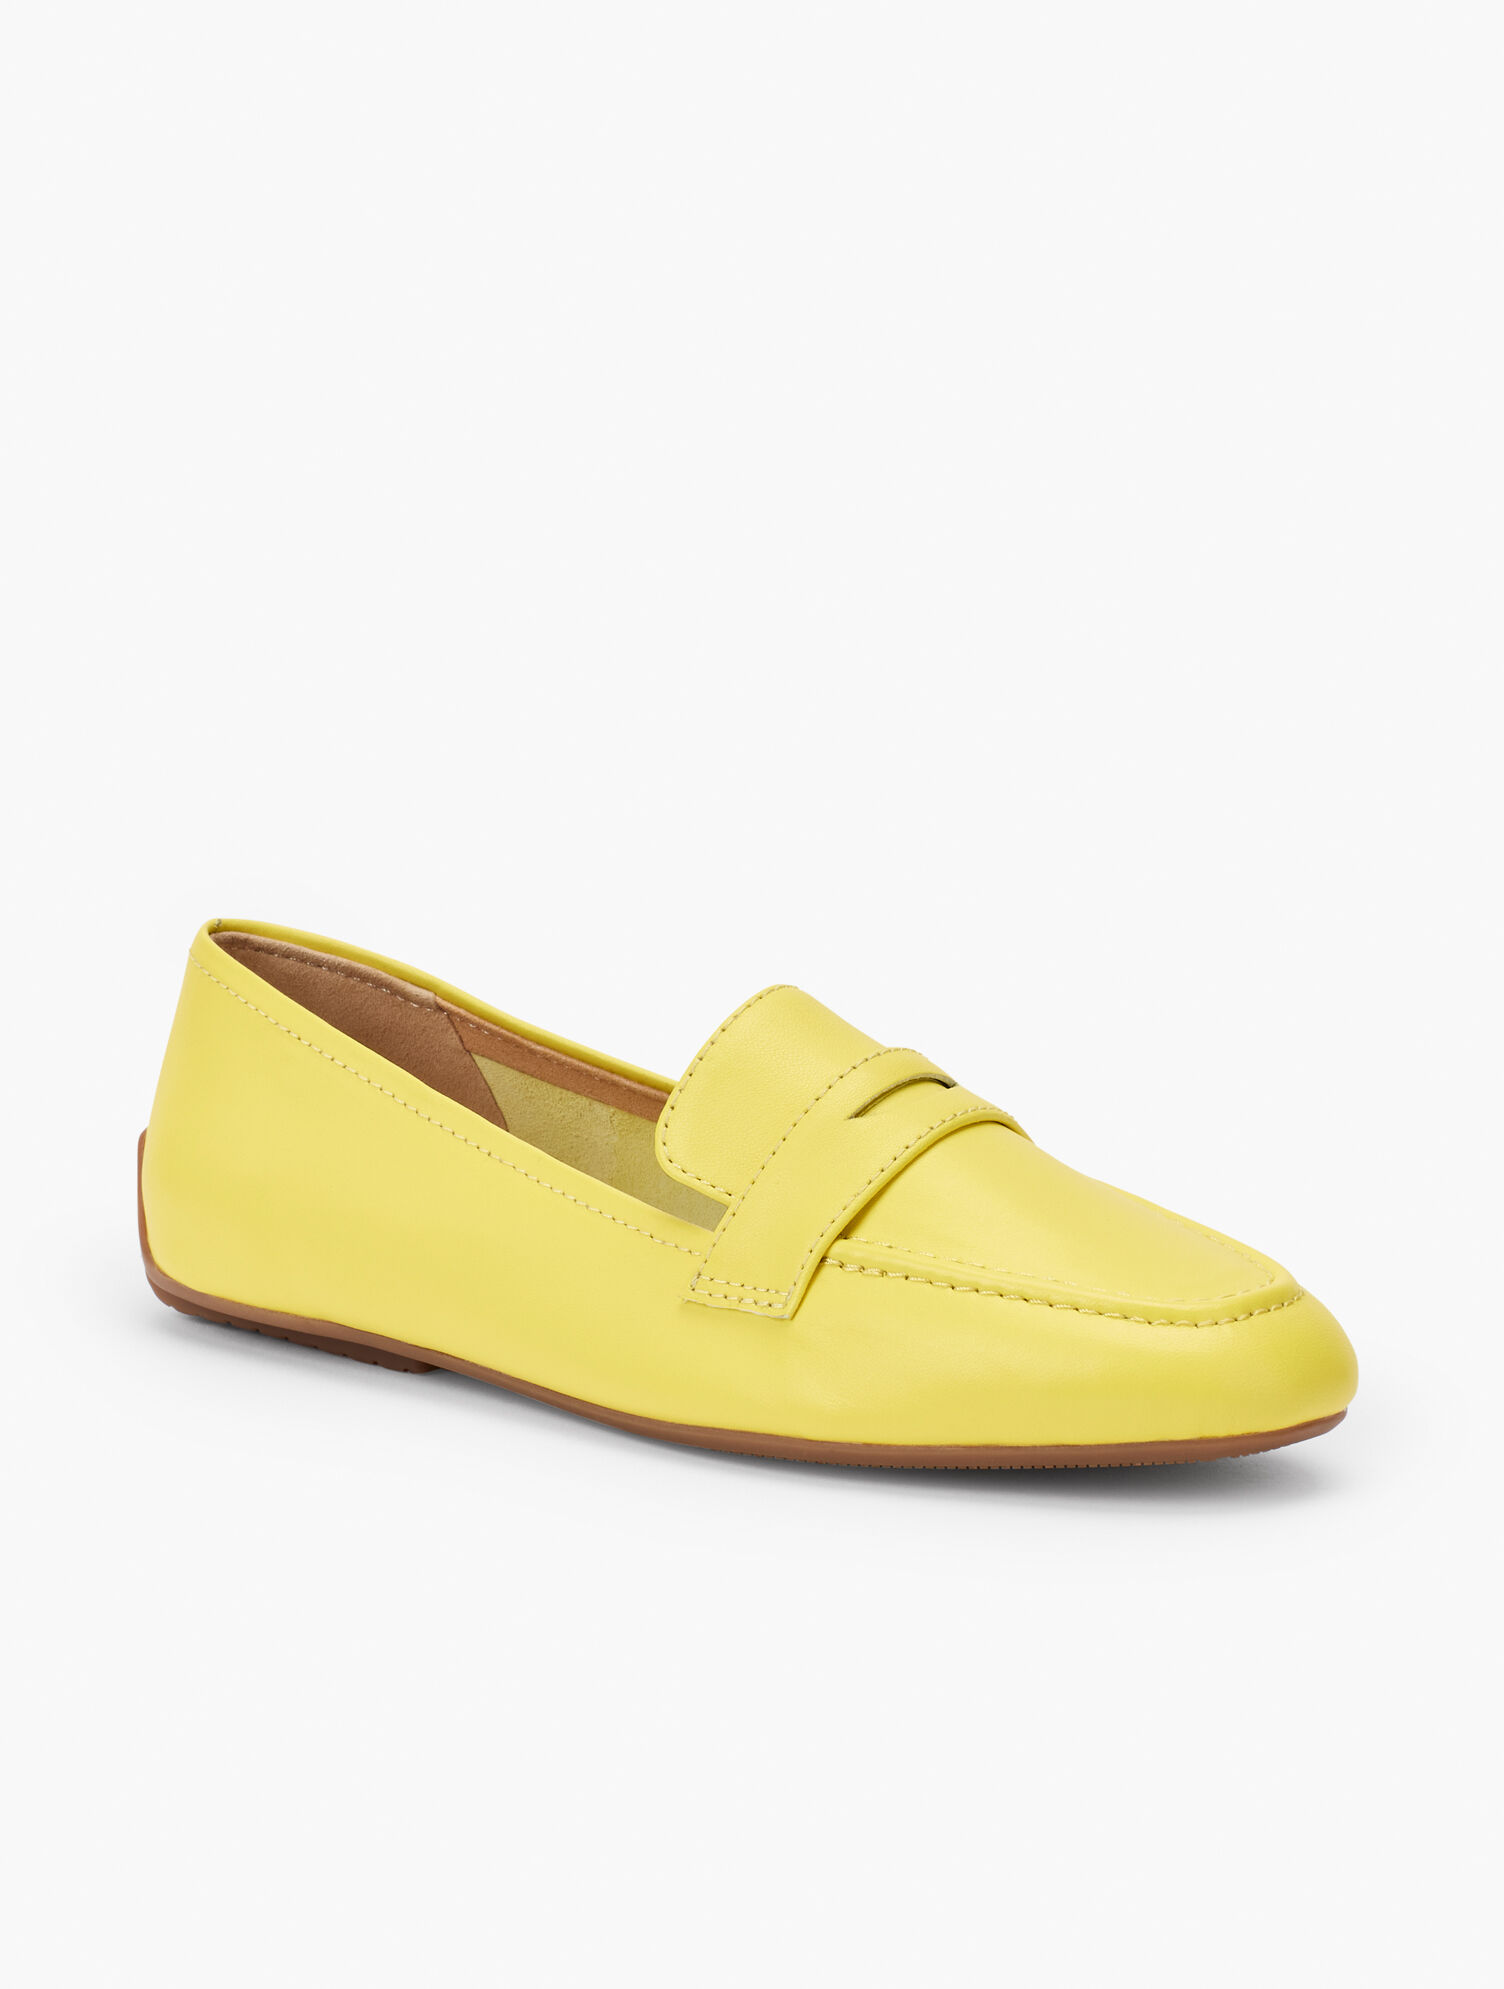 Jessie Leather Loafers | Talbots